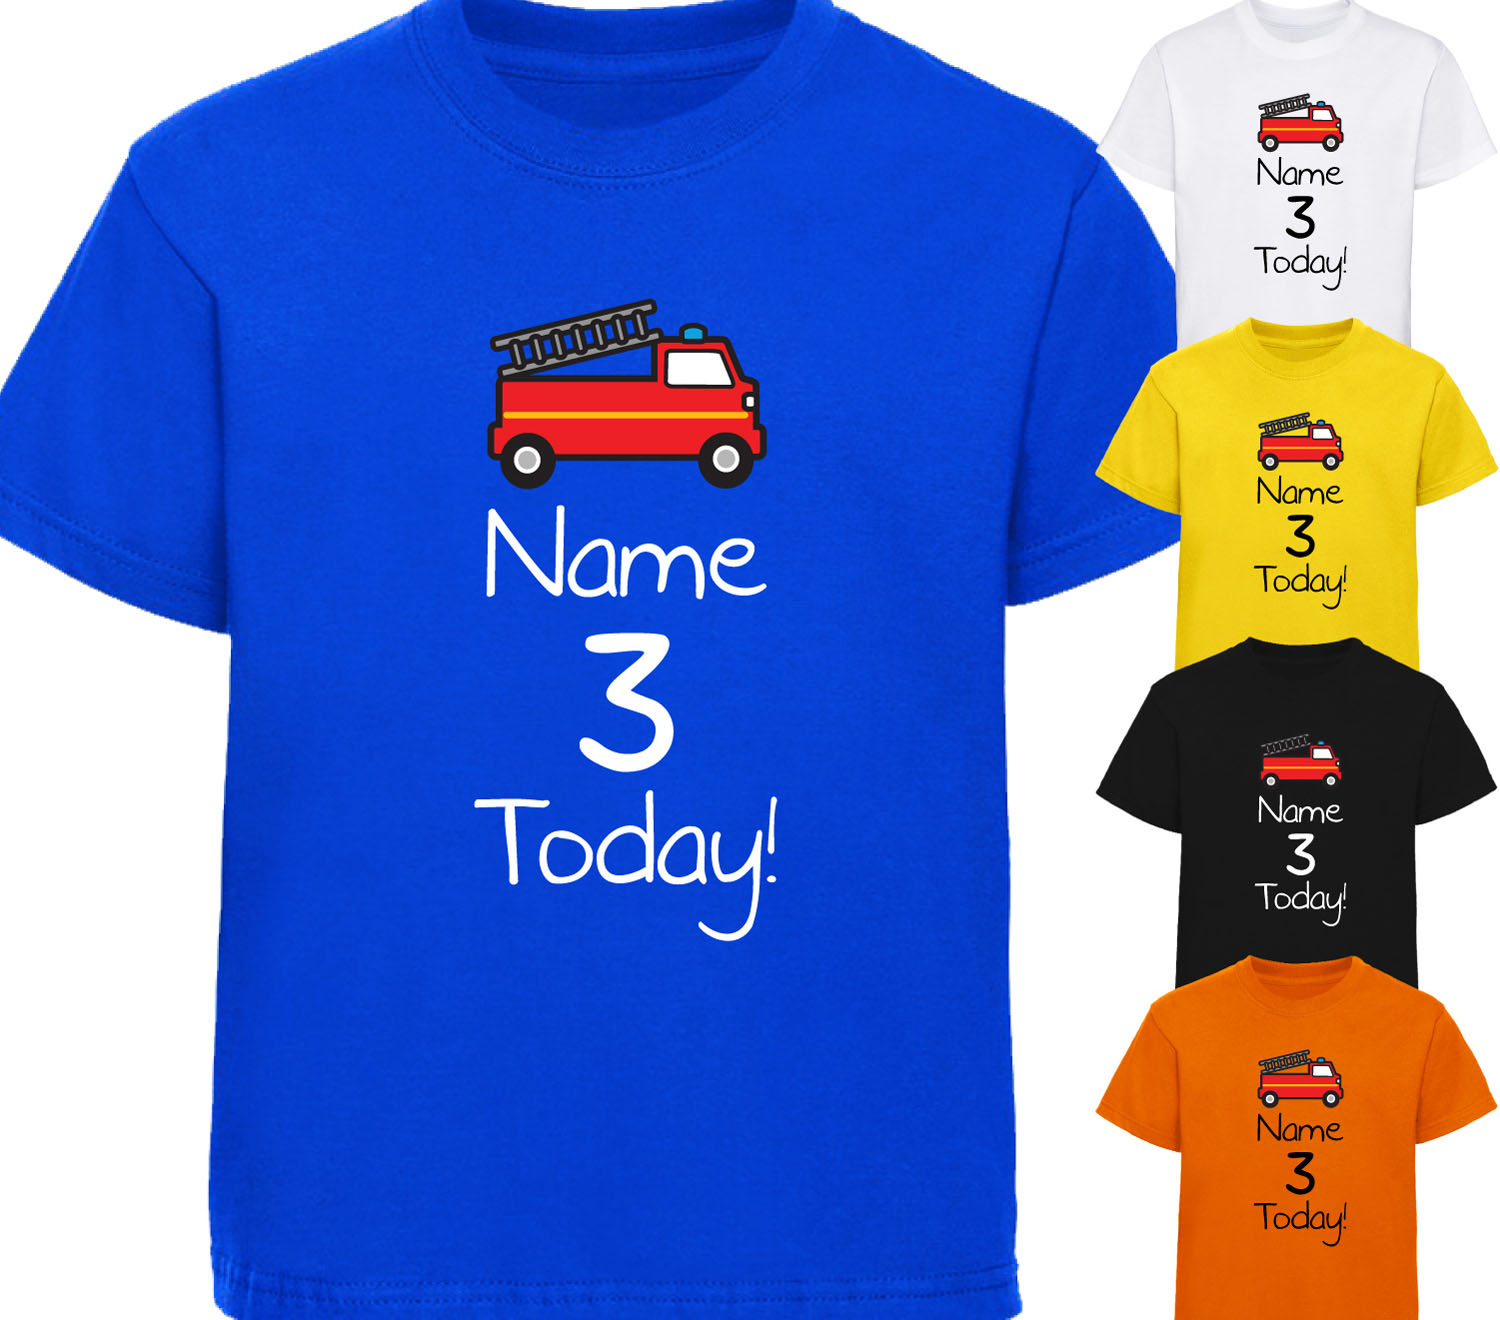 personalised birthday top 1,2,3,4,5,6 years embroidered childs birthday tee personalised gift Clothing Unisex Kids Clothing Tops & Tees T-shirts Graphic Tees Childrens birthday tshirt with fire engine 